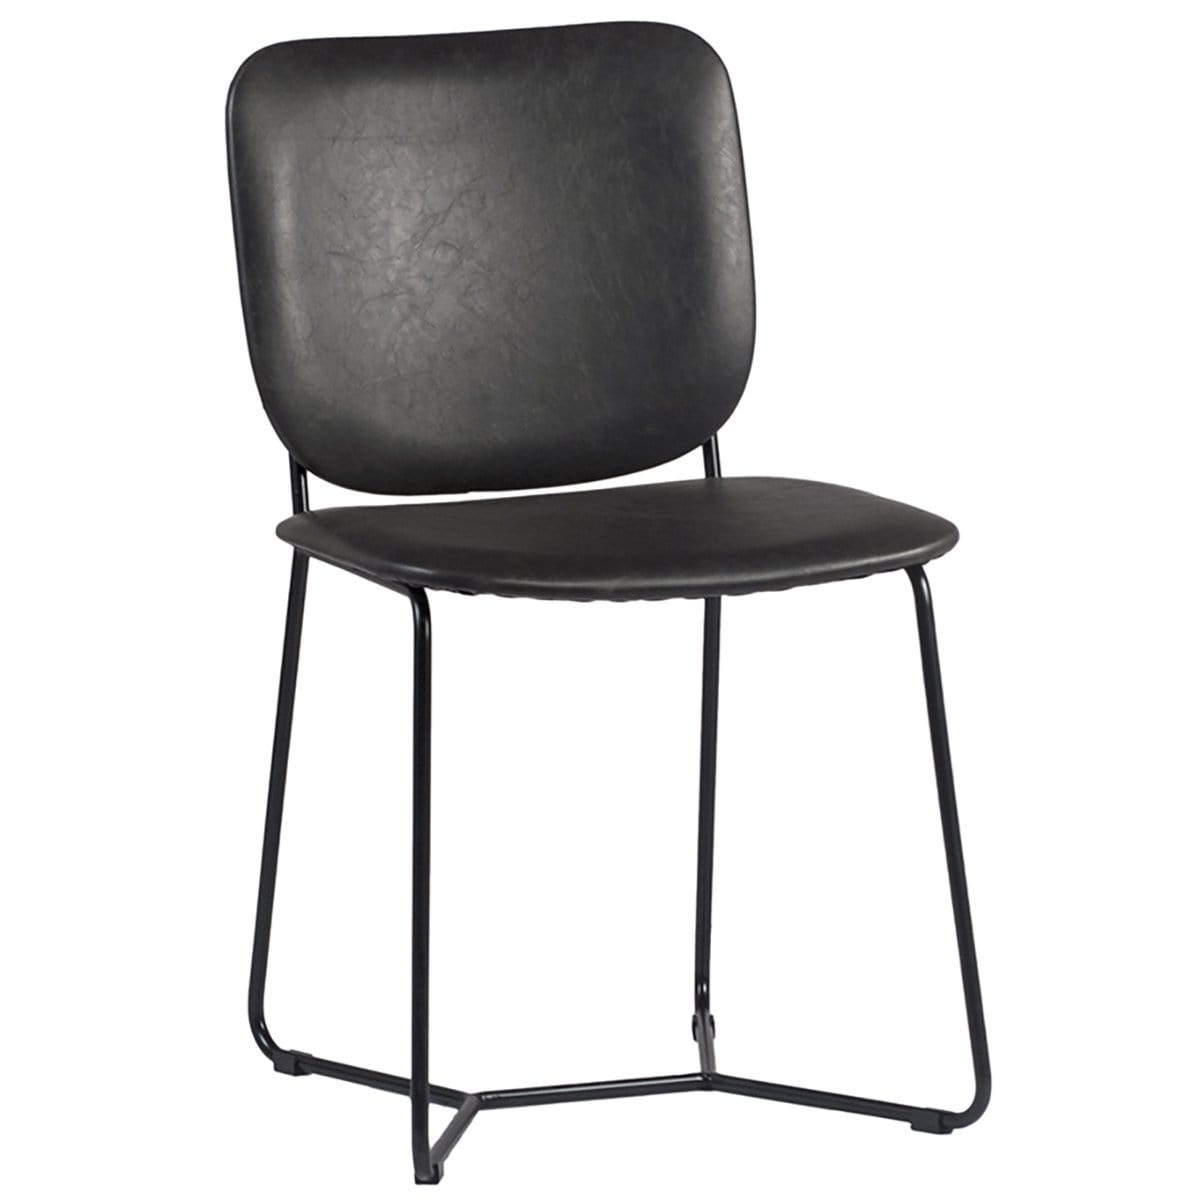 Dovetail Lublin Dining Chair Furniture dovetail-DOV12068